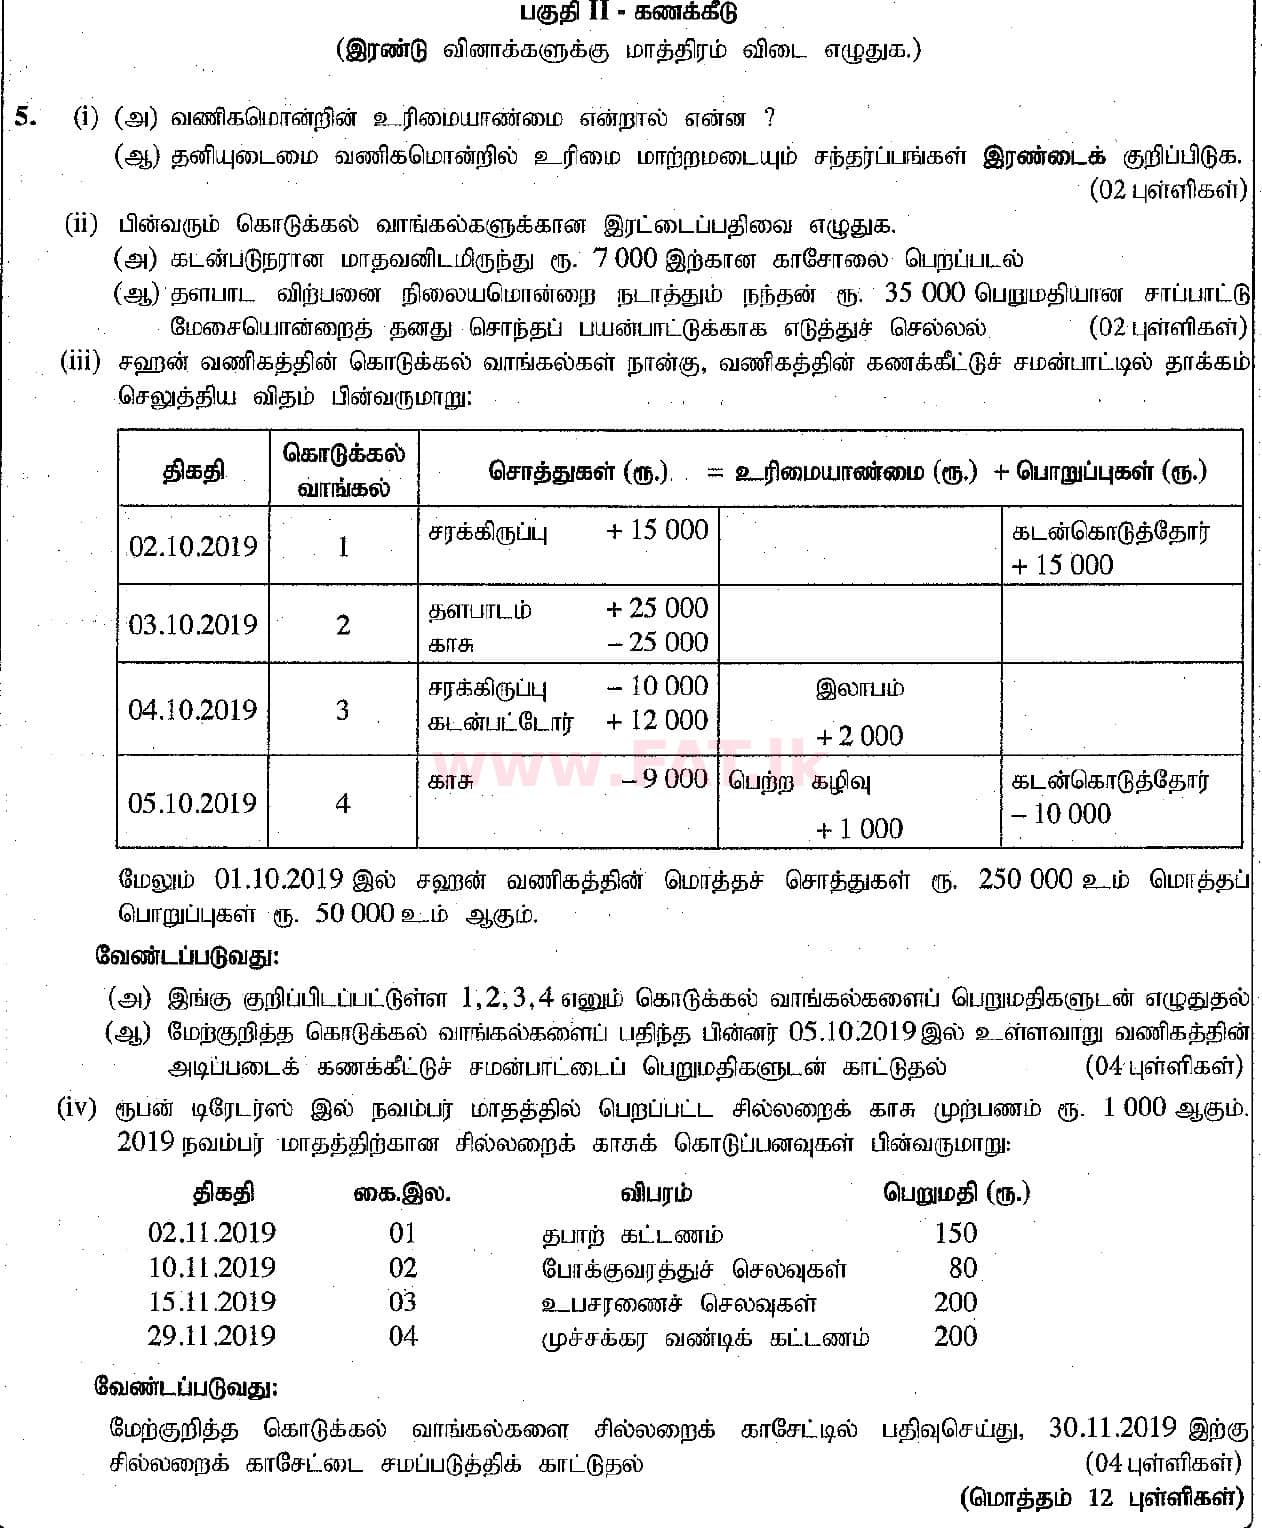 National Syllabus : Ordinary Level (O/L) Business and Accounting Studies - 2019 March - Paper II (தமிழ் Medium) 5 1